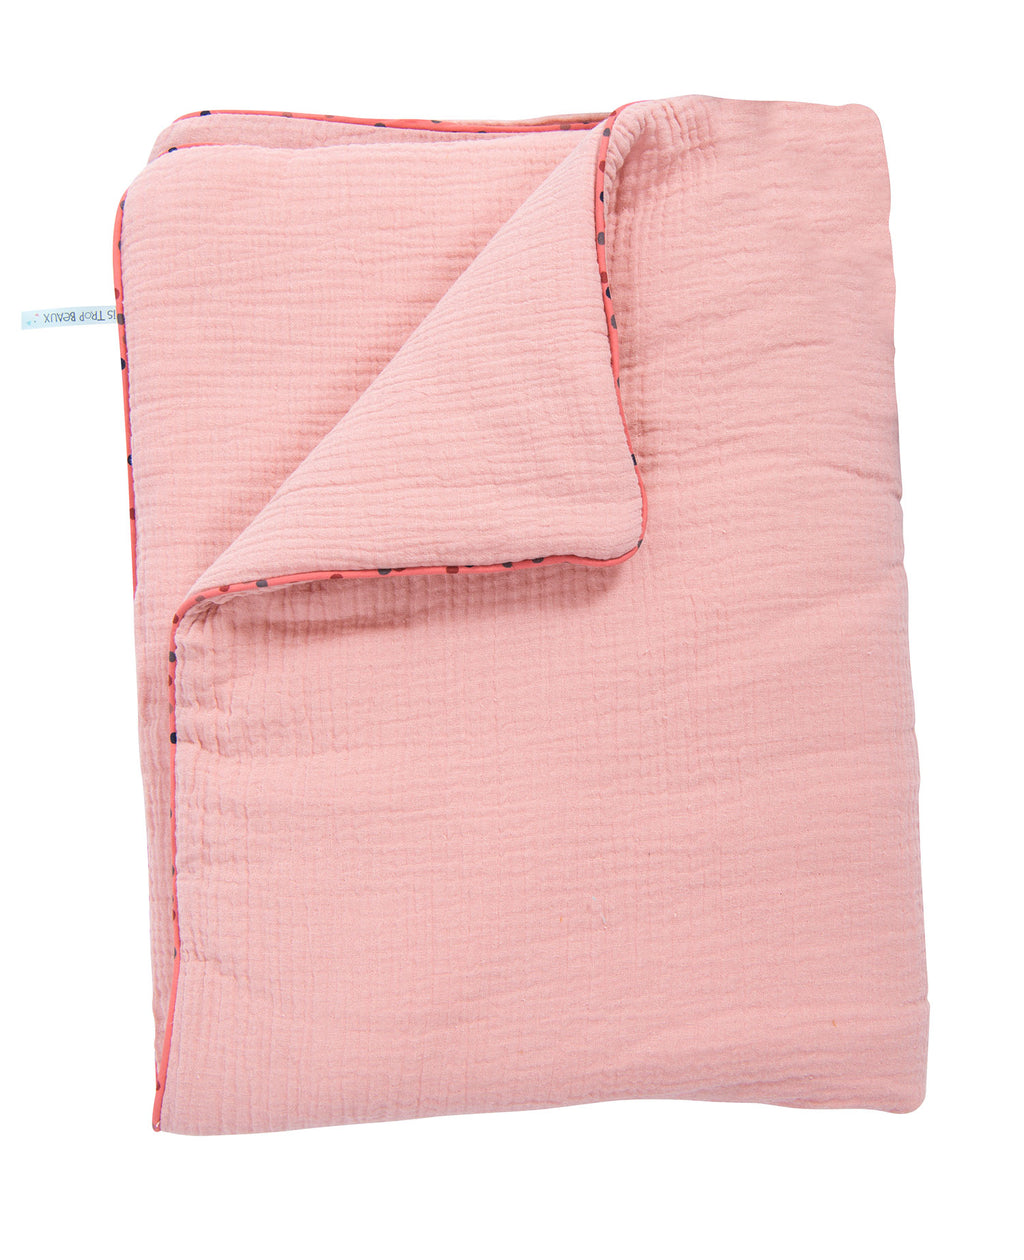 Moulin Roty | 100% Cotton Blanket | Pink | Size: 90cm x 70 cm